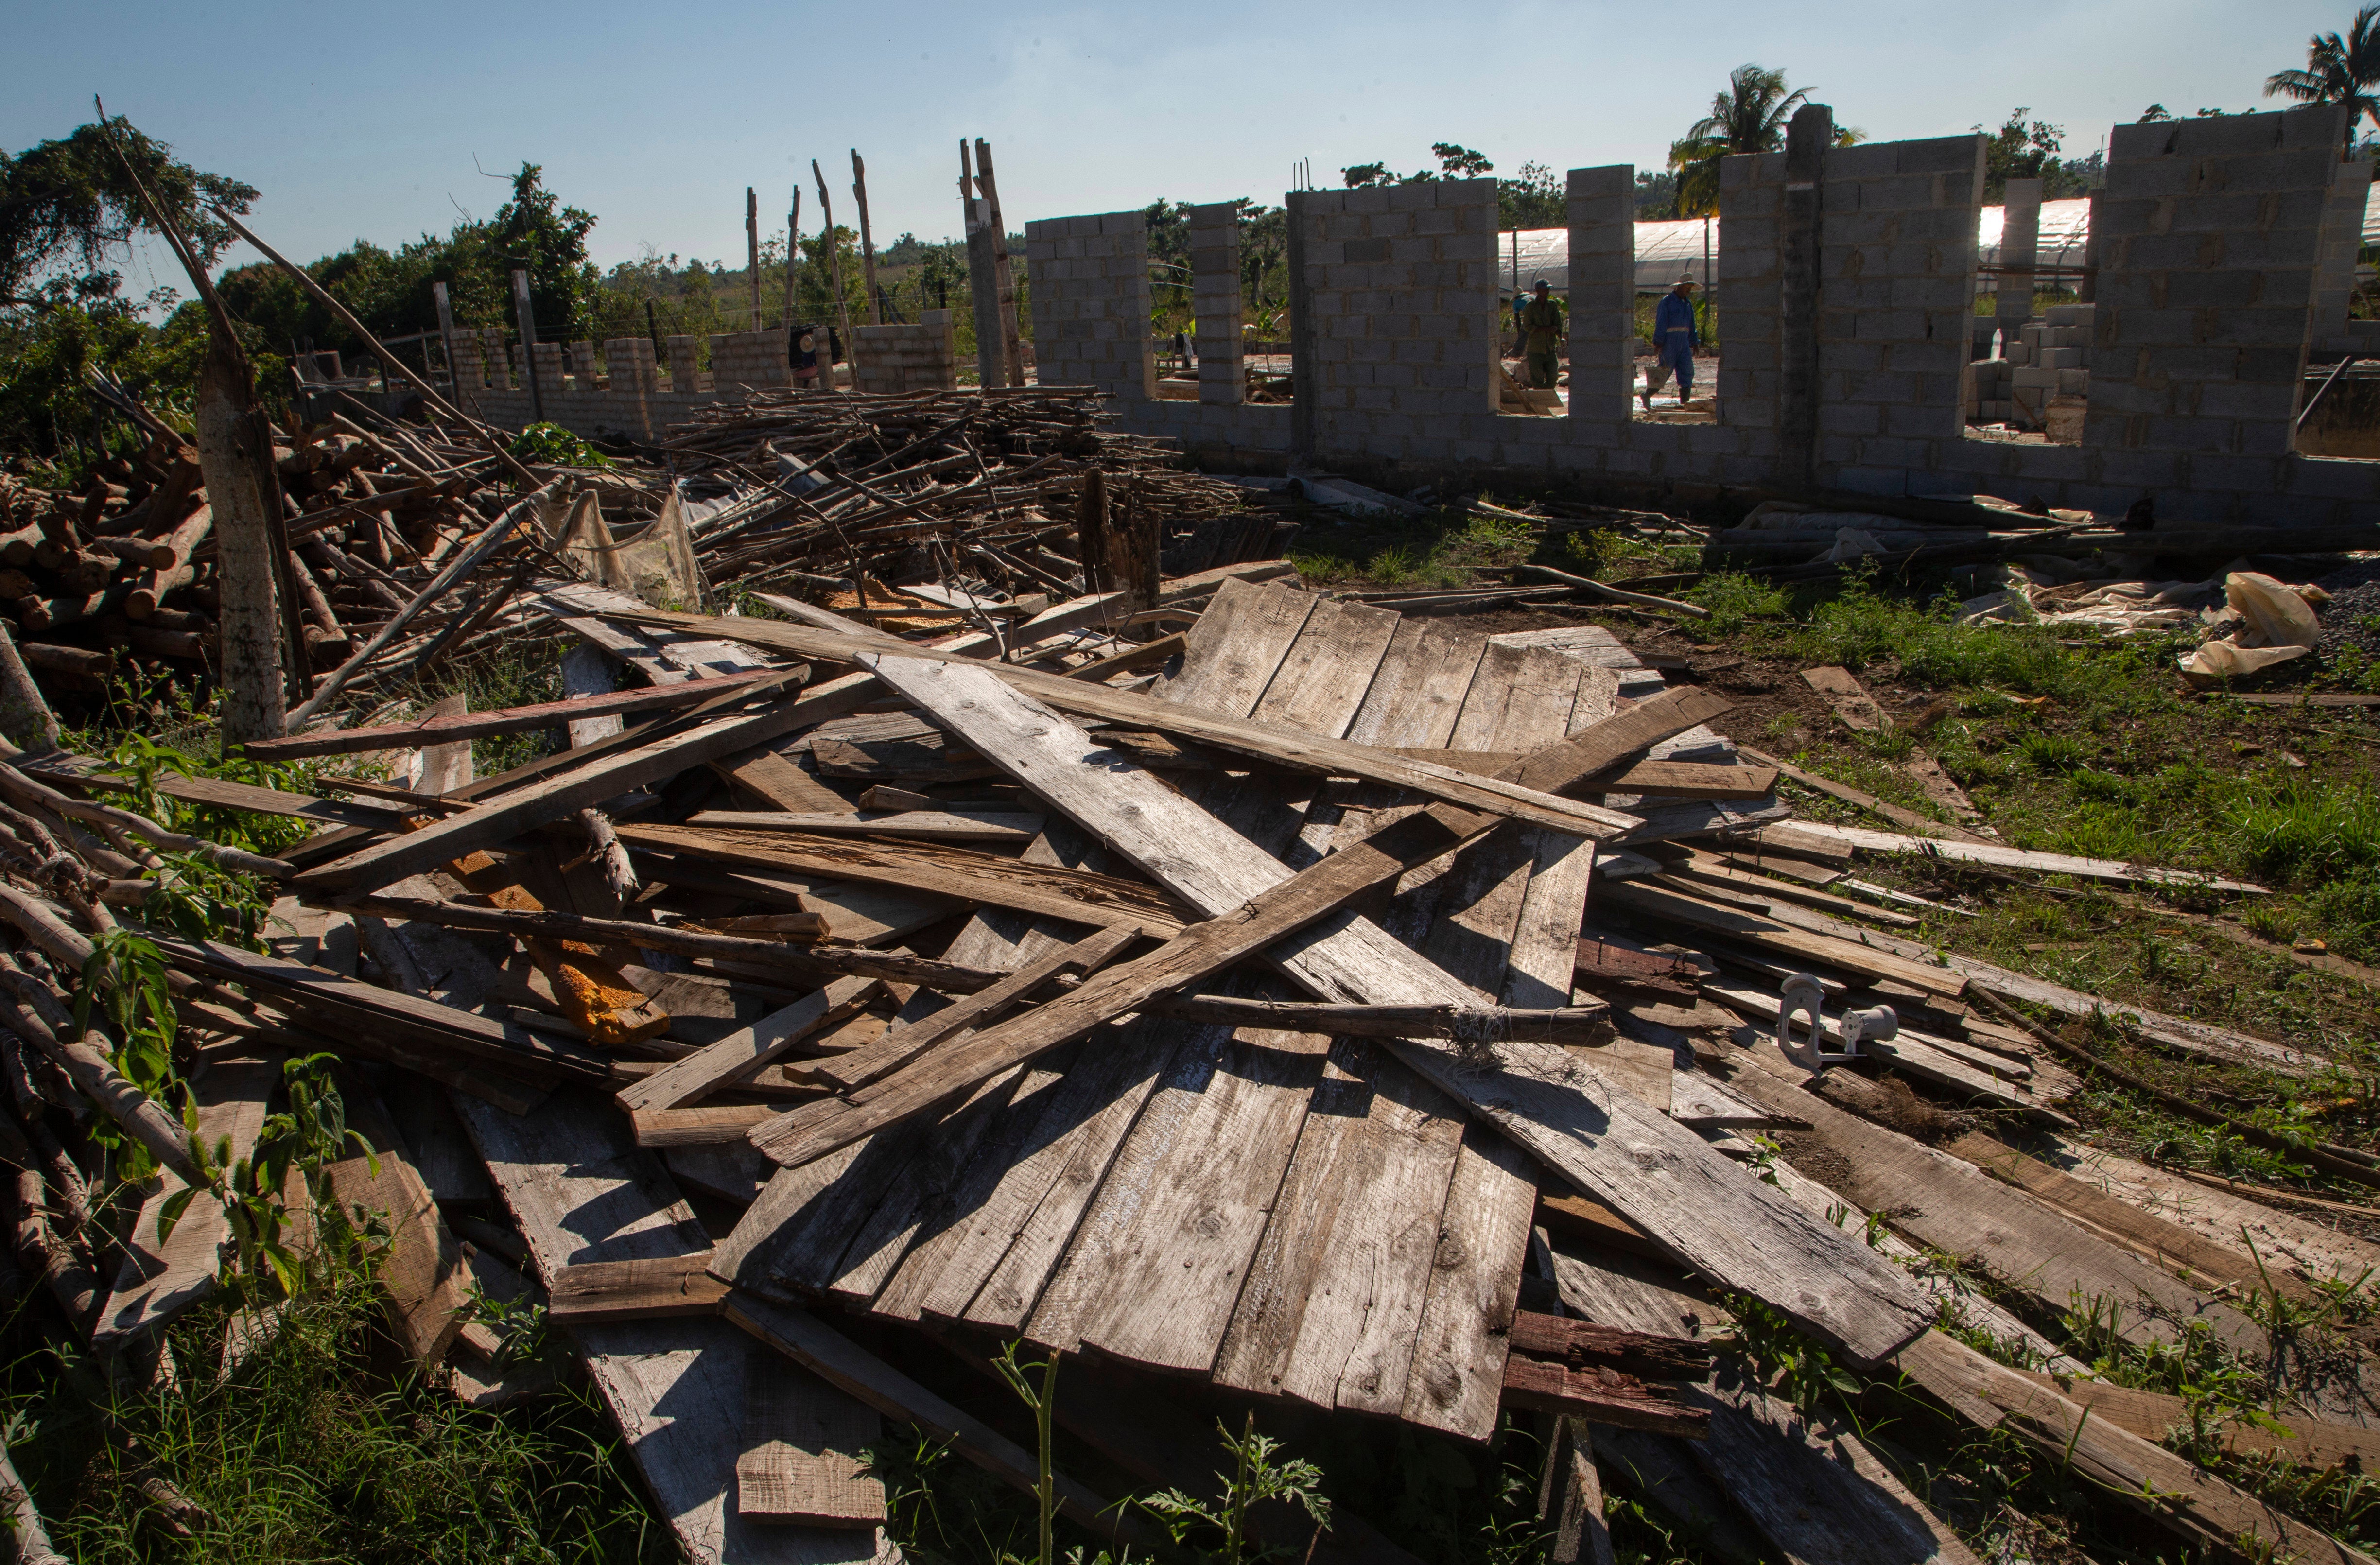 Workers construct a new tobacco house, as they recover from the destruction caused by 2022's Hurrican Ian in Pinar del Río, Cuba